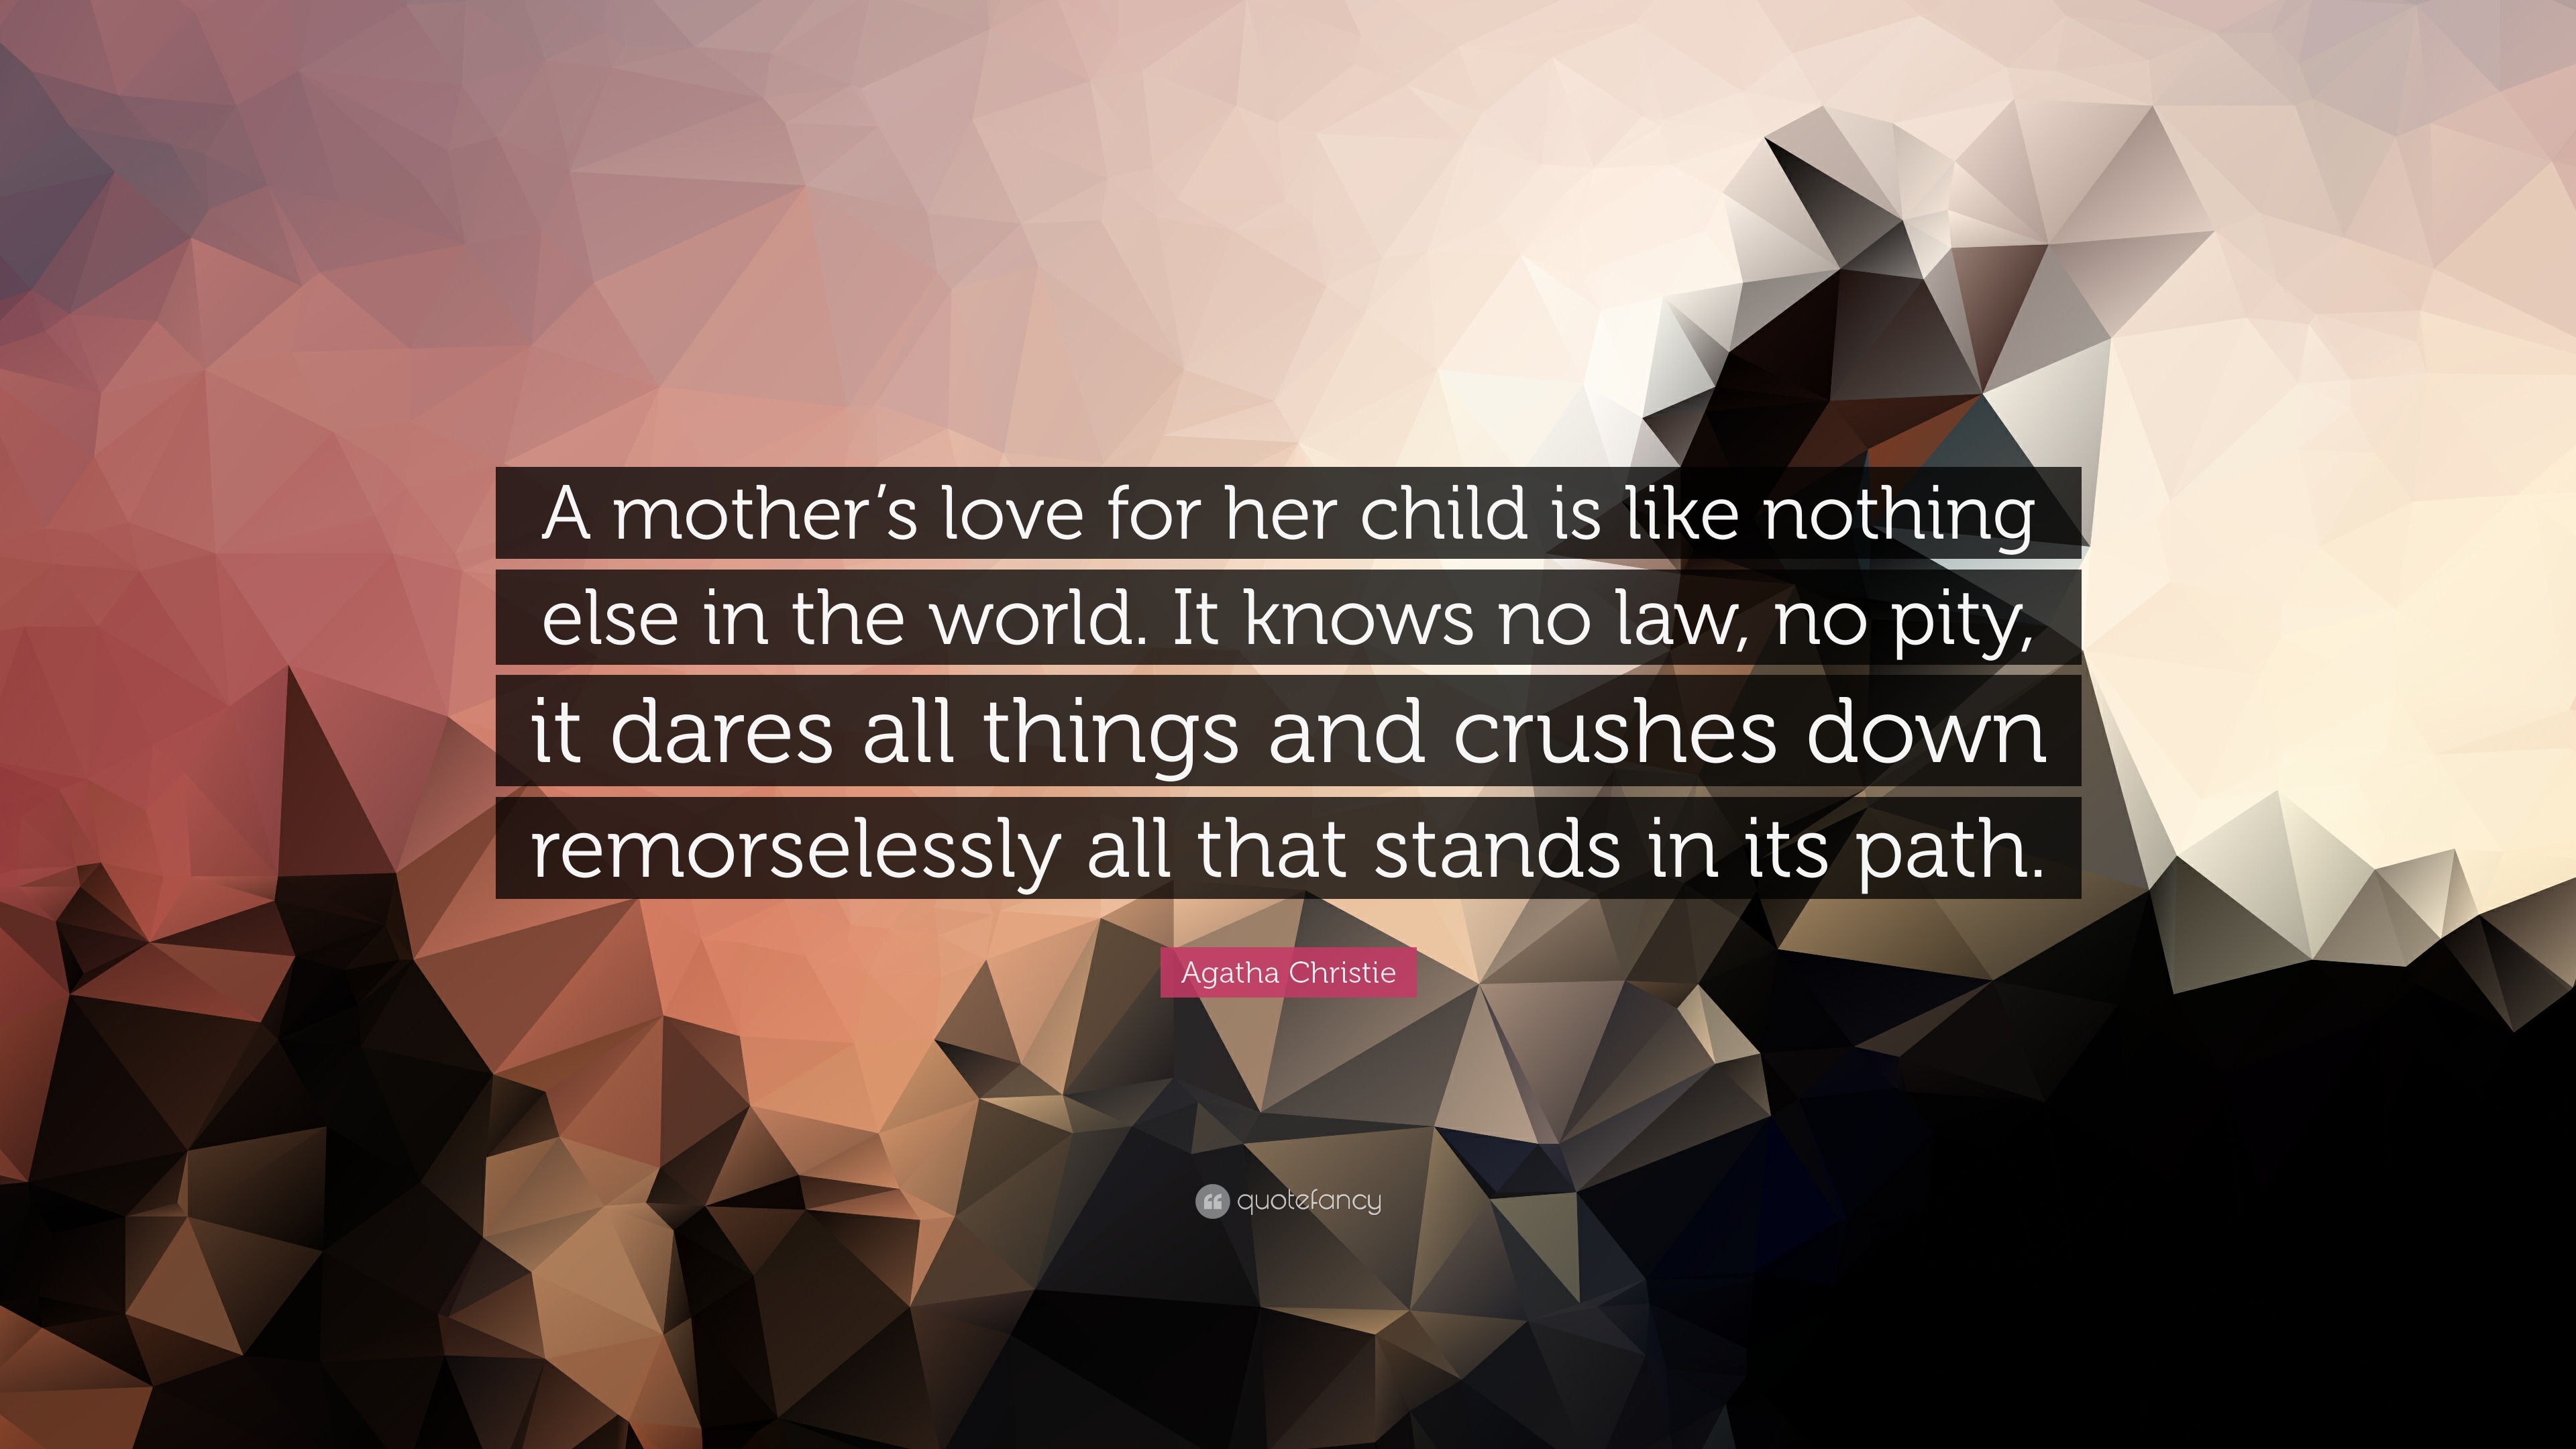 Agatha Christie Quote “A mother s love for her child is like nothing else in